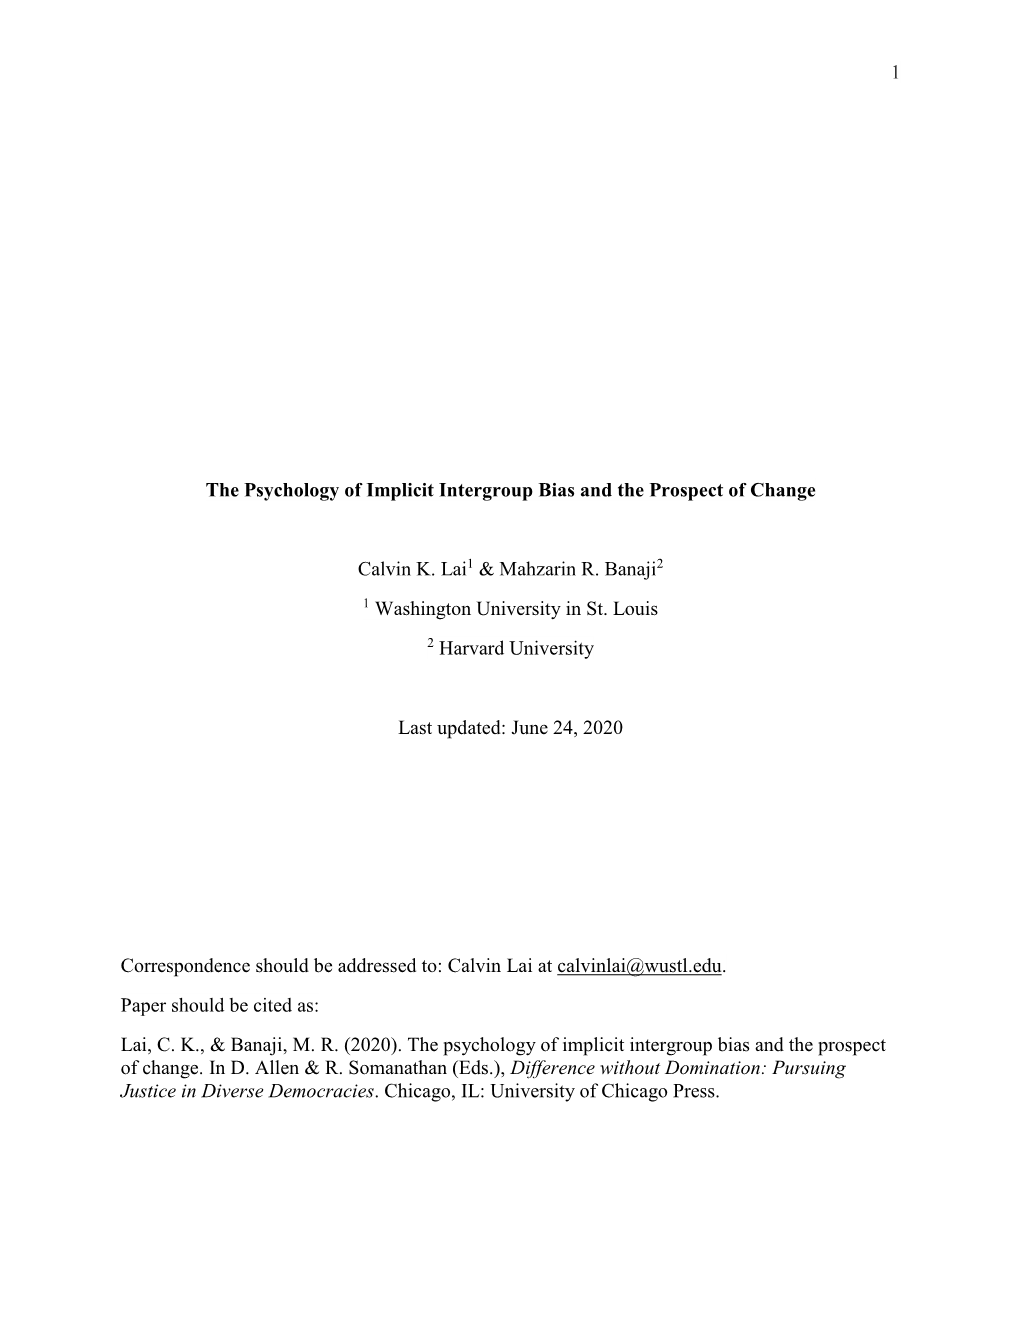 1 the Psychology of Implicit Intergroup Bias and the Prospect Of